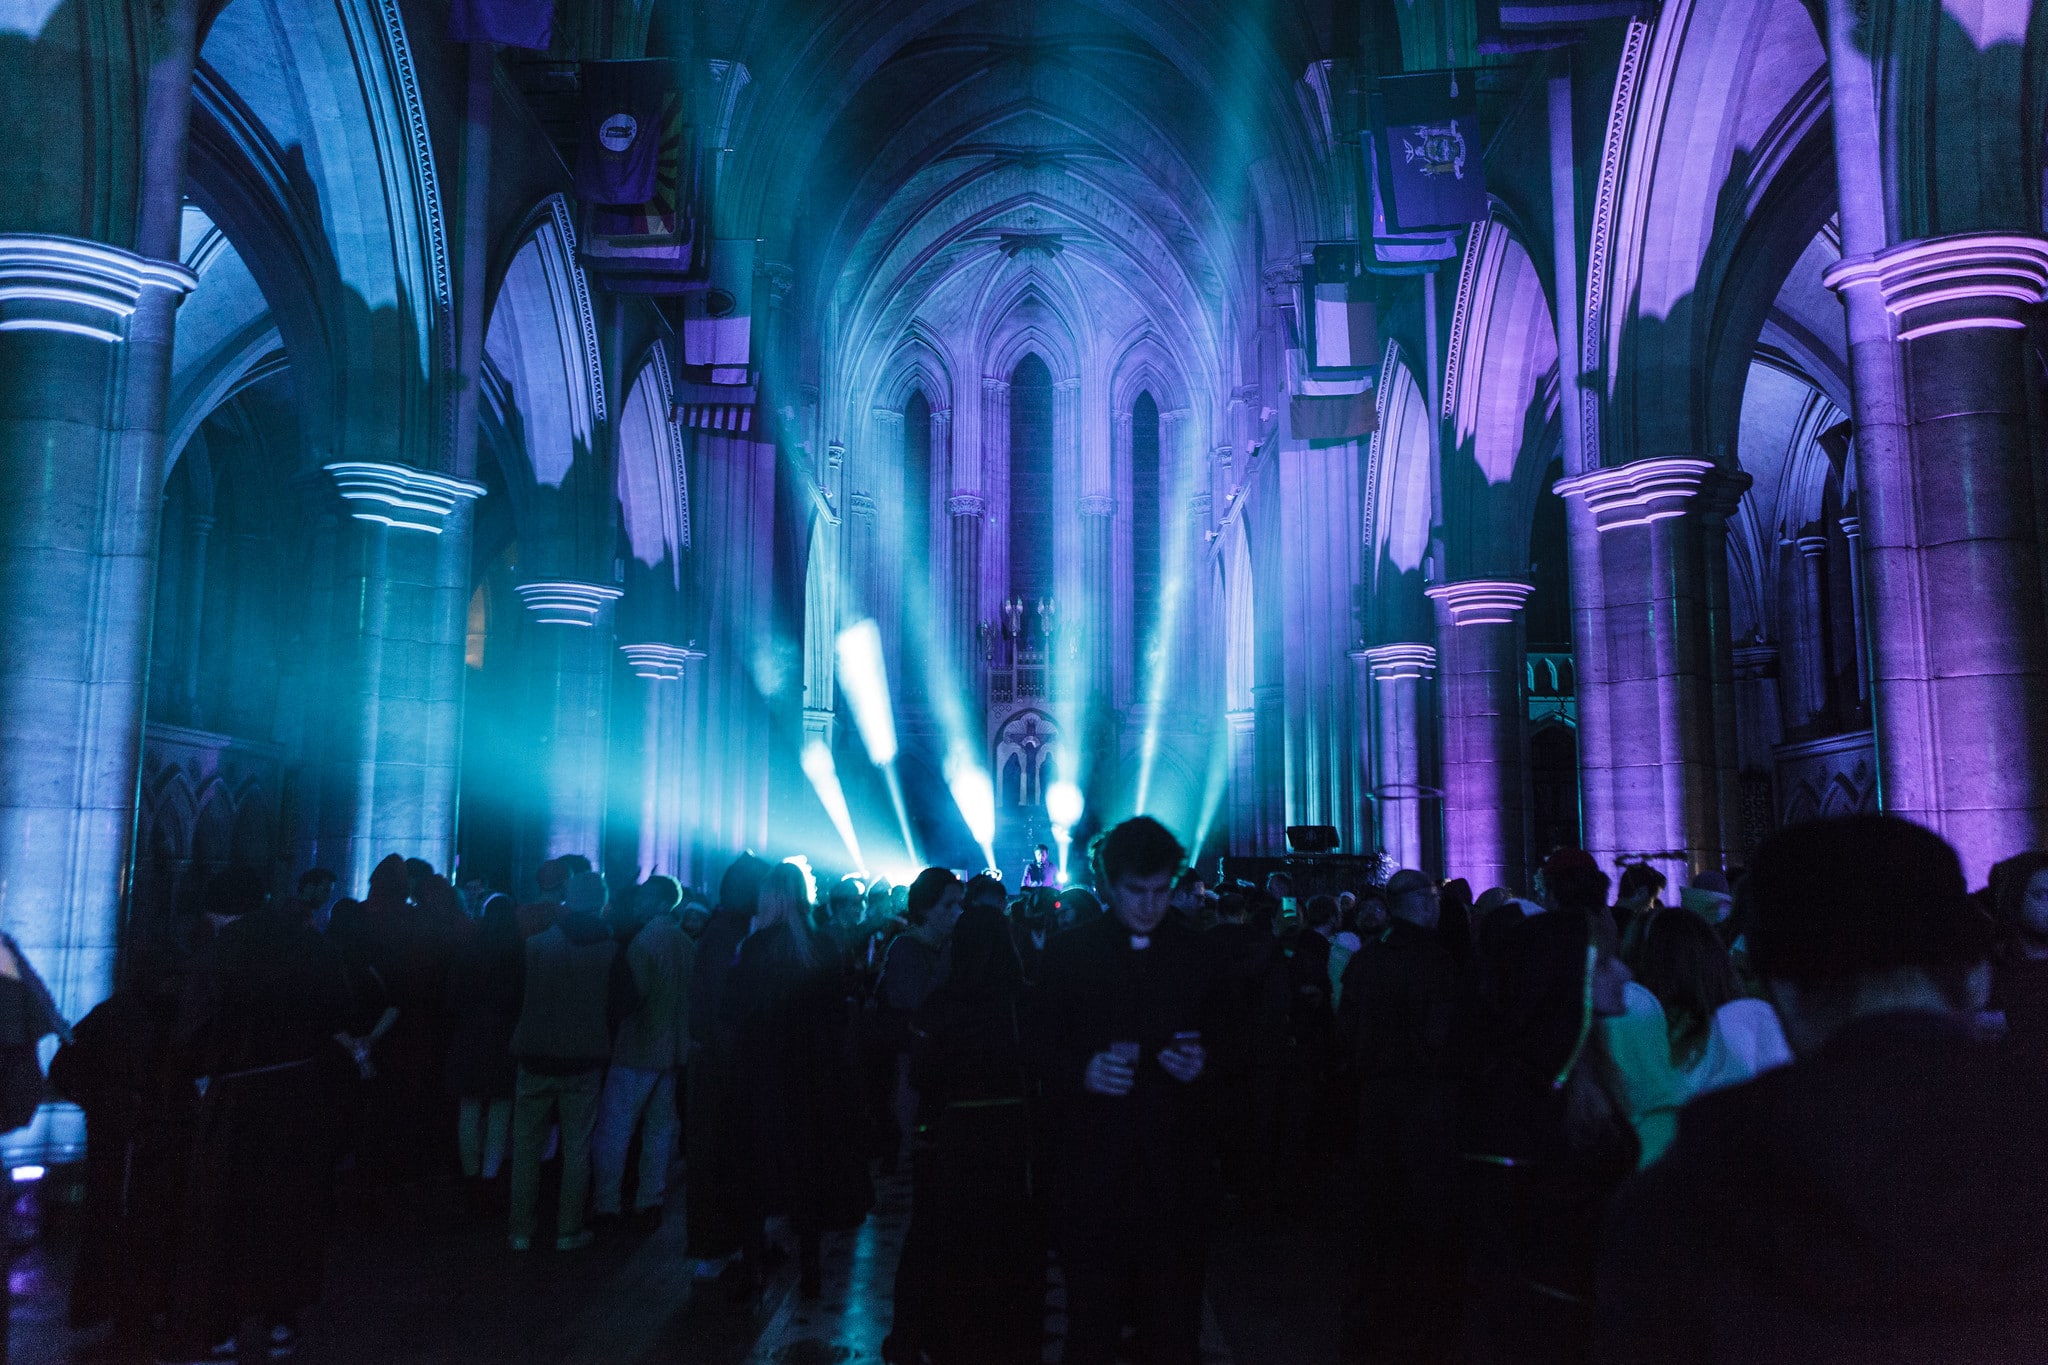 WATO Church party in Paris : The Last Monastery